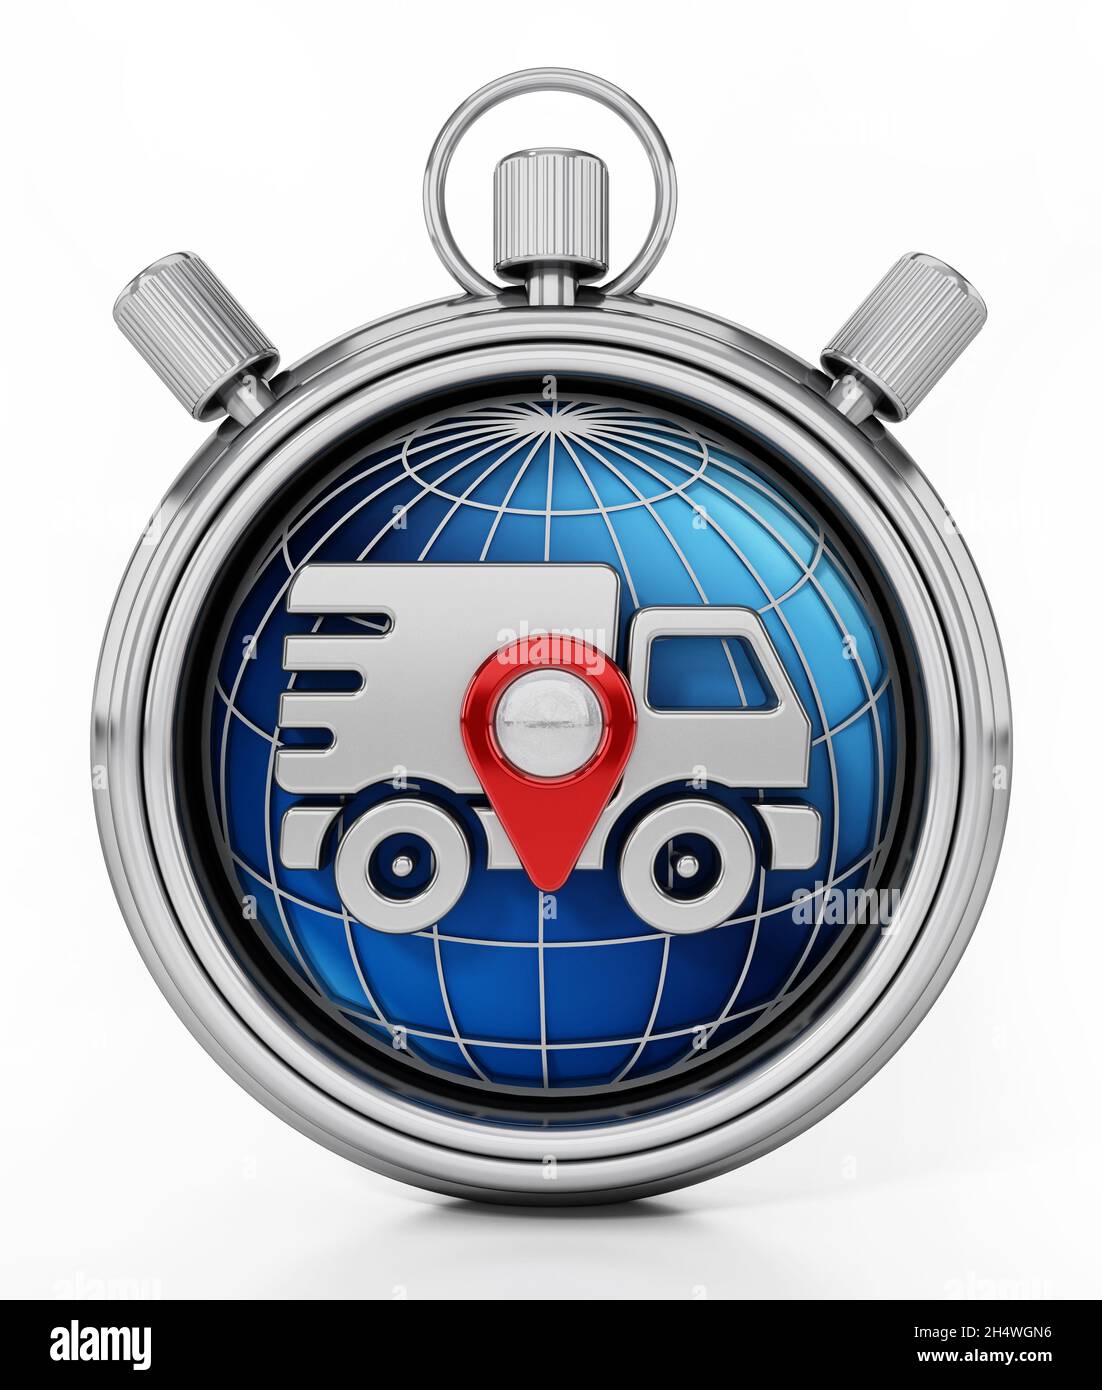 Delivery van and navigation marker on the globe inside the chronometer. 3D illustration. Stock Photo